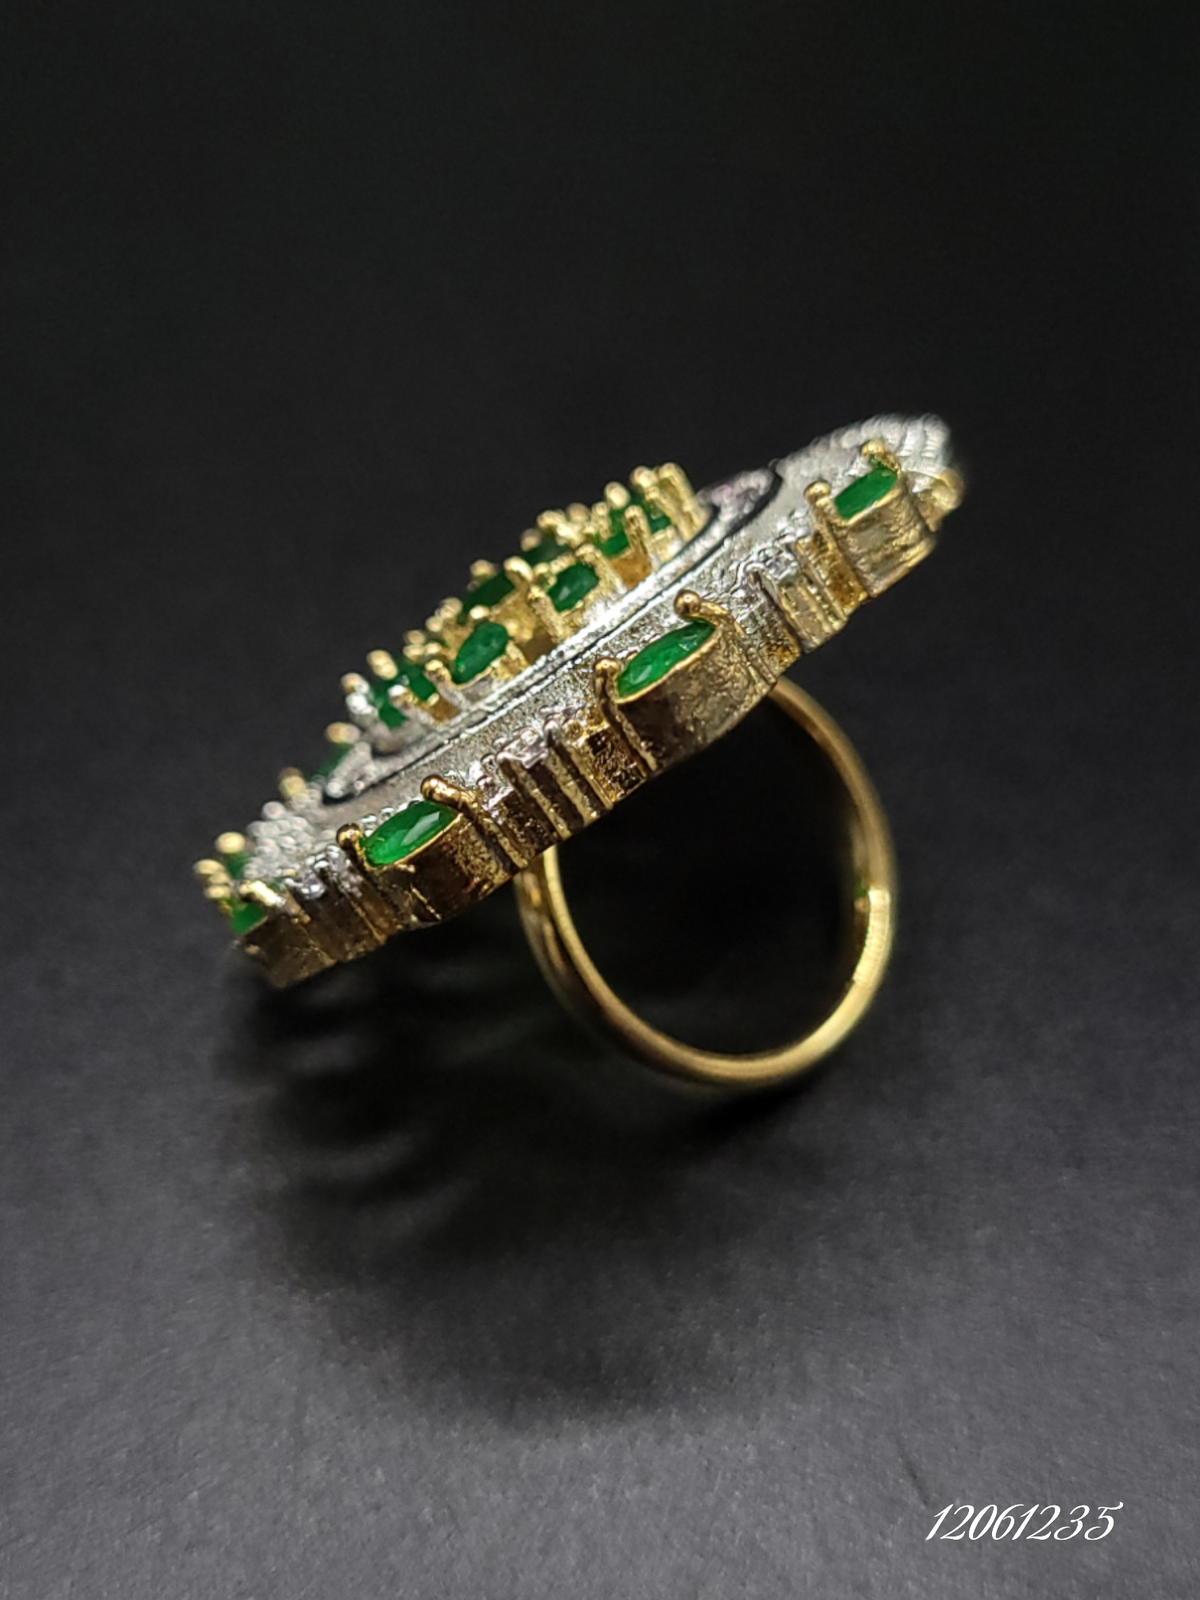 STUNNING GOLD DIAMOND RING WITH GREEN STONES